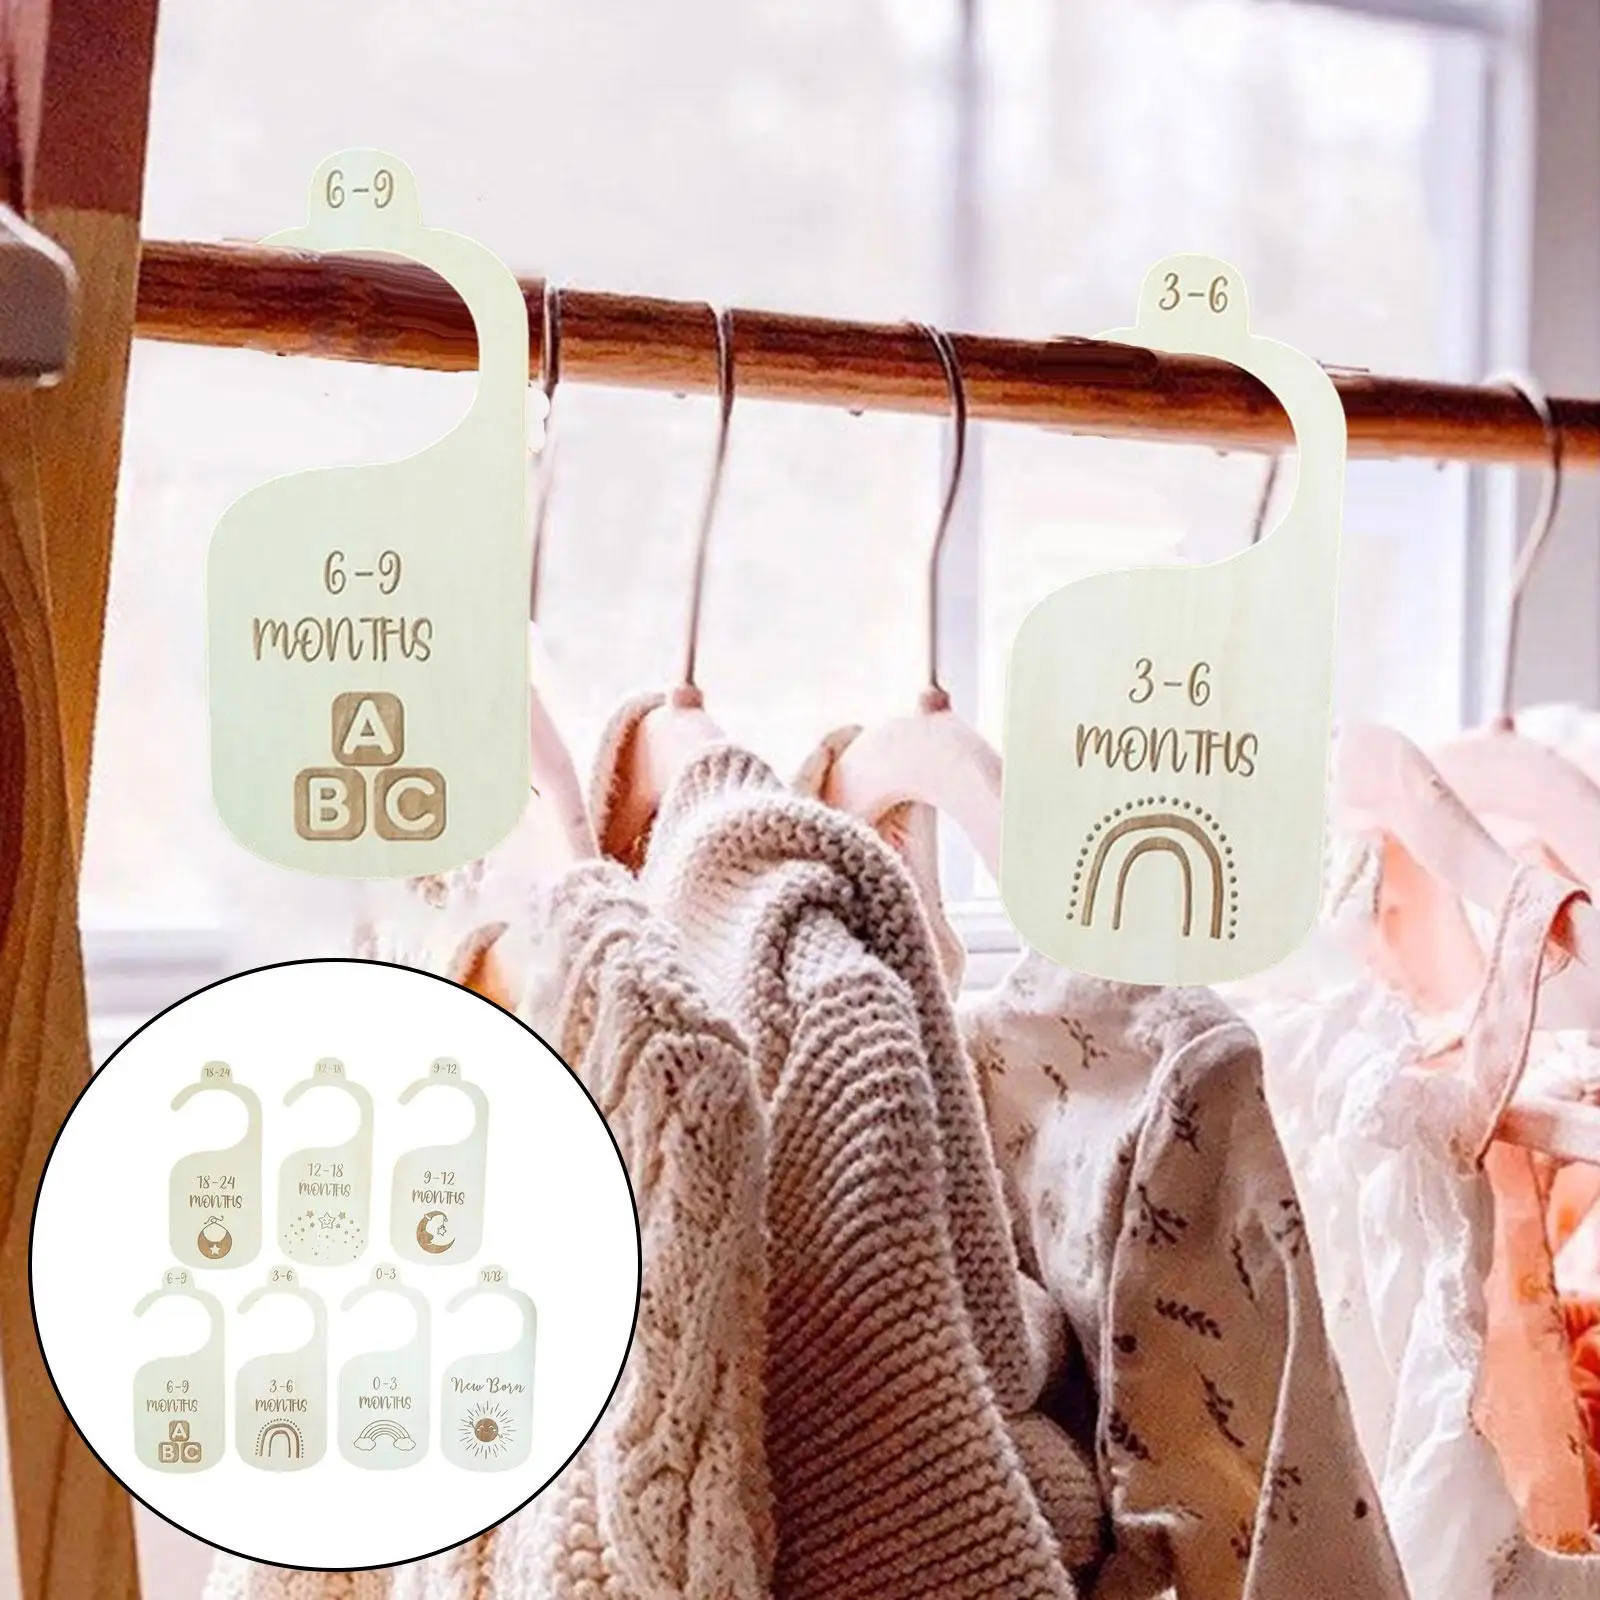 7Pcs Wooden Baby Closet Dividers Baby Clothes Size Hanger Organizer Baby Clothes Separator from Newborn to 24 Month for Closet